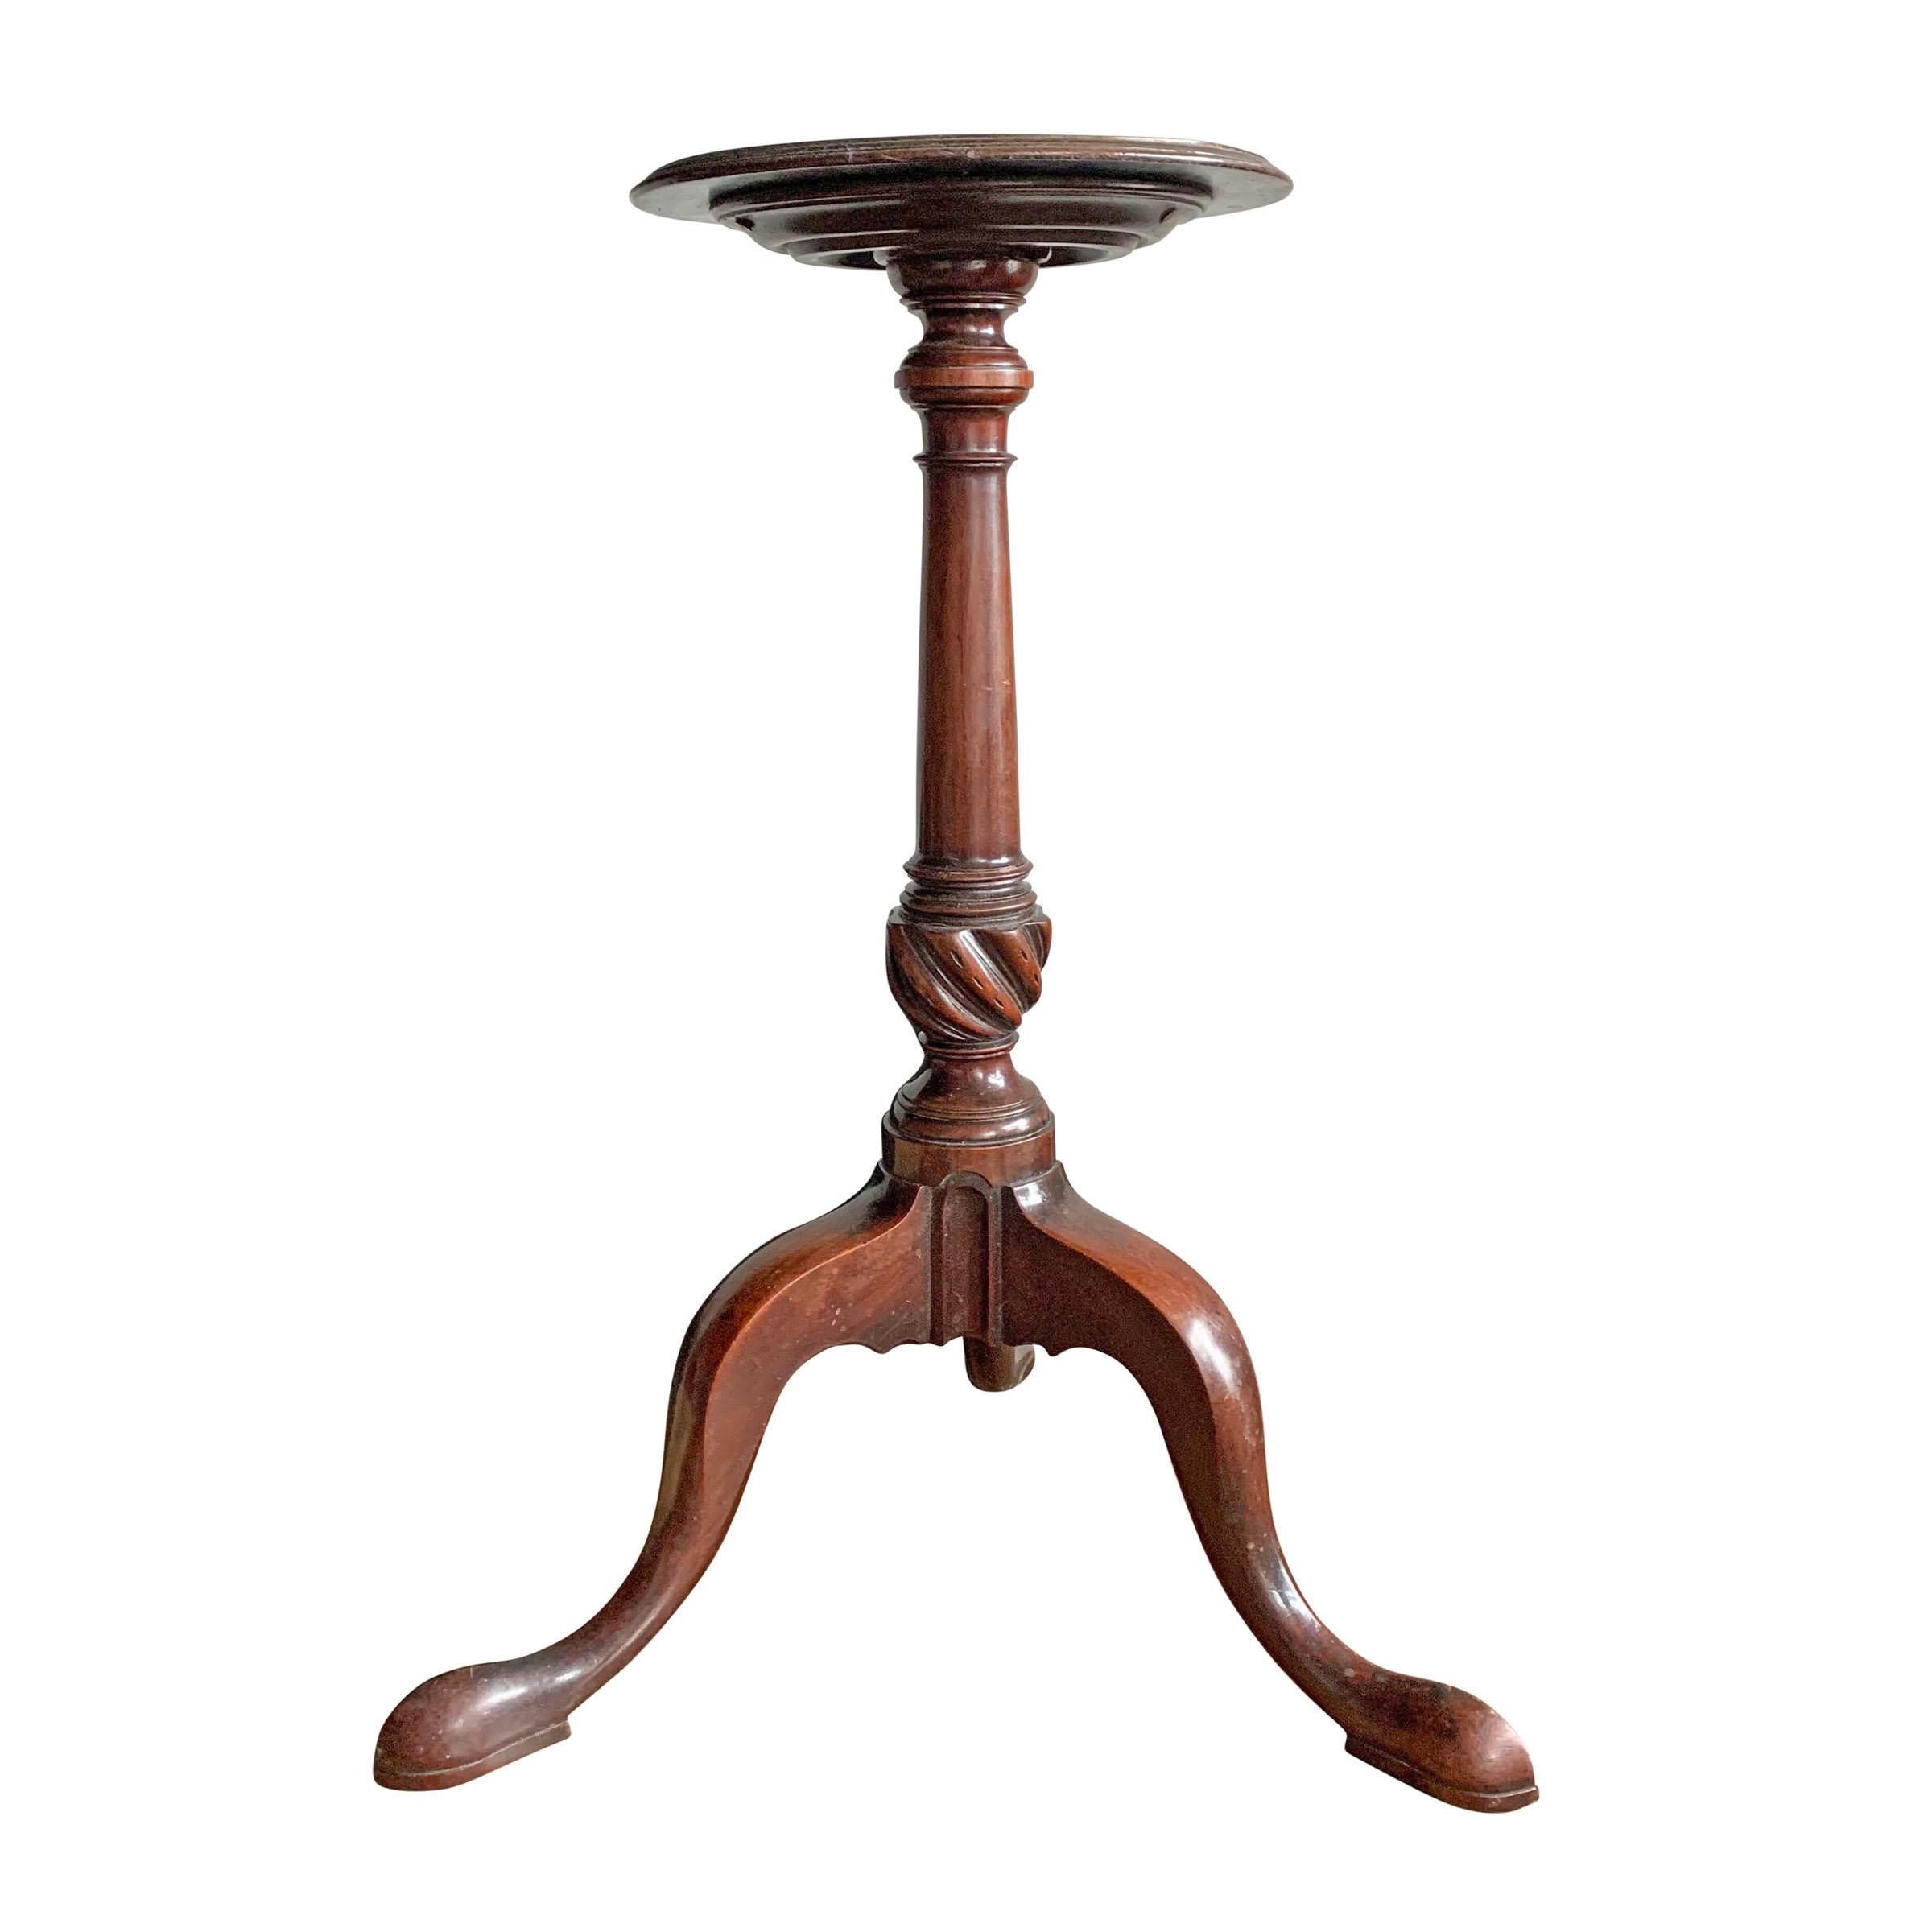 Queen Anne 18th Century American Candle Stand